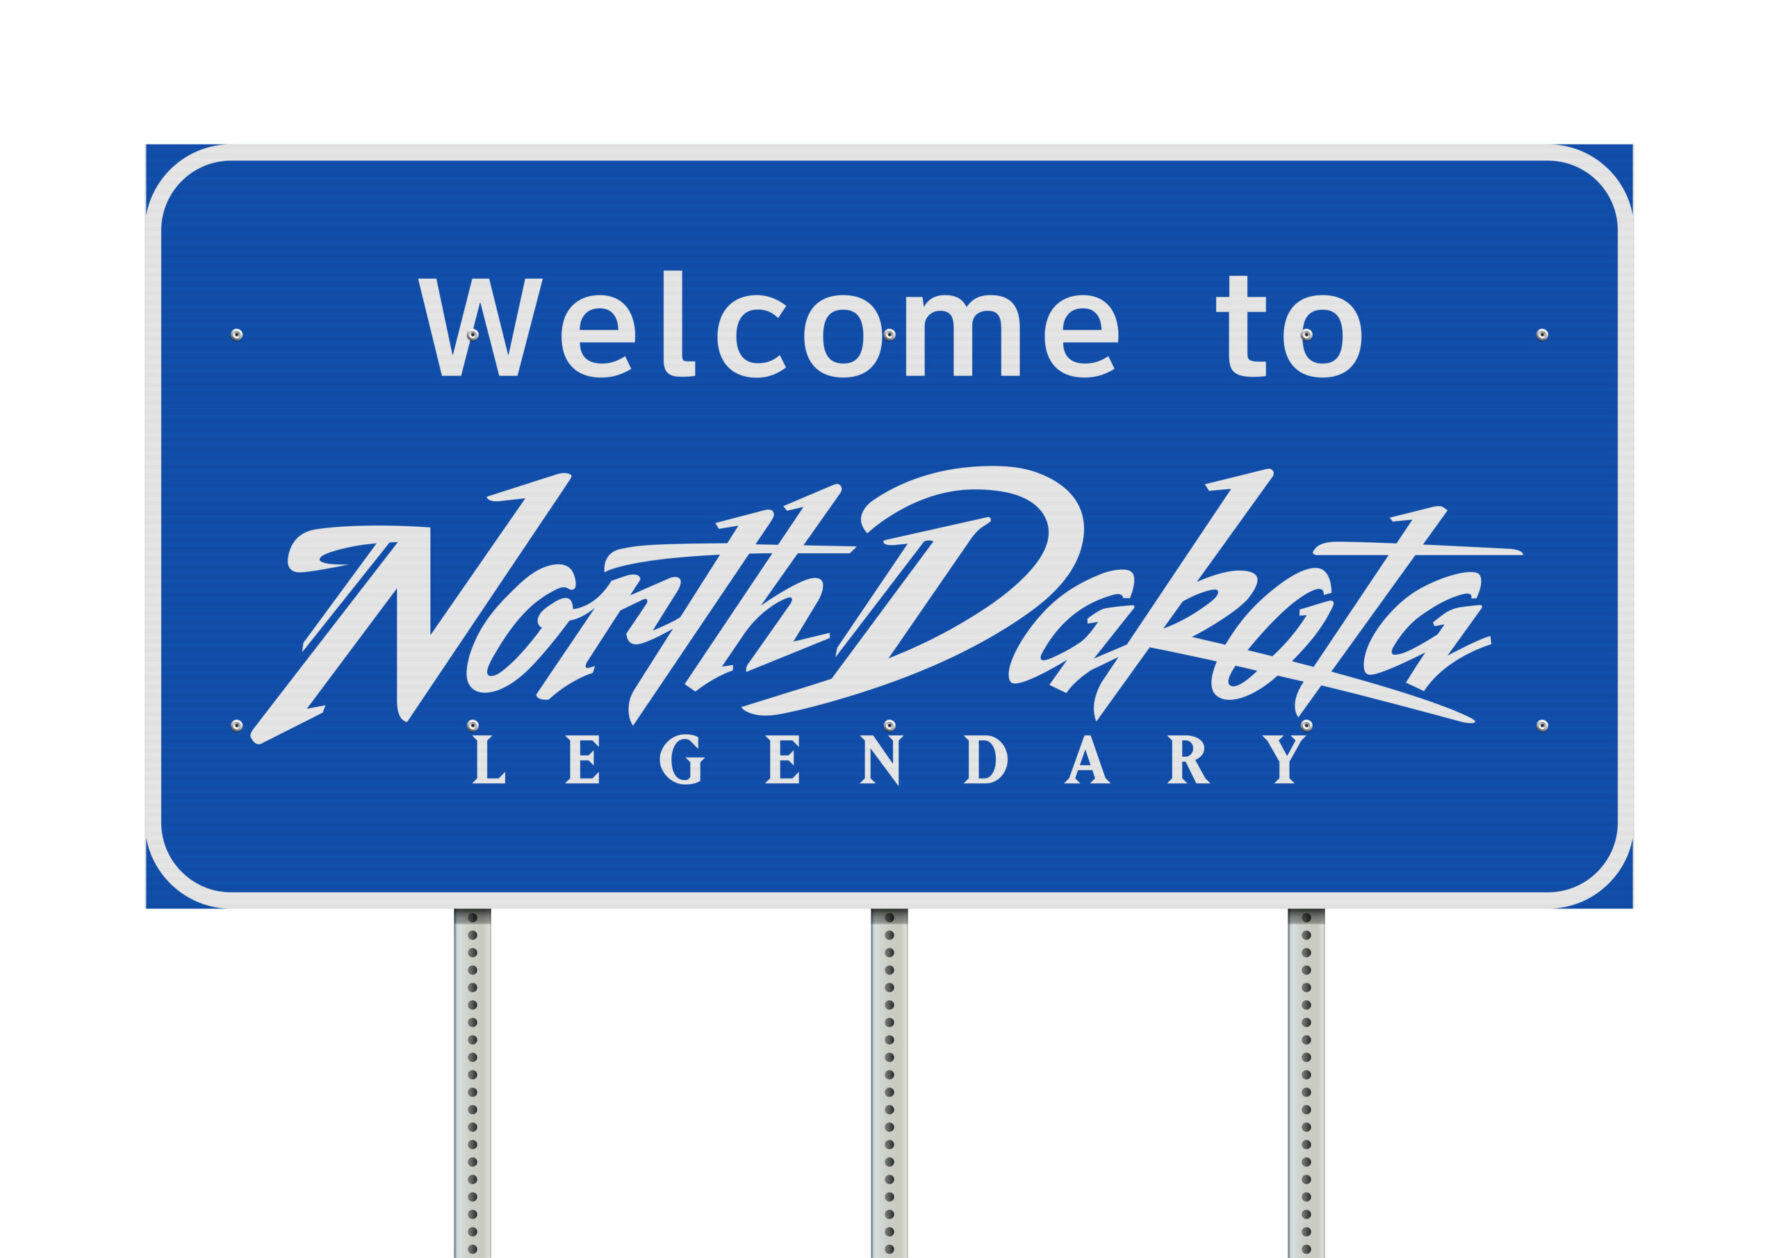 North Dakota: An Innovative and Leading Cybersecurity State